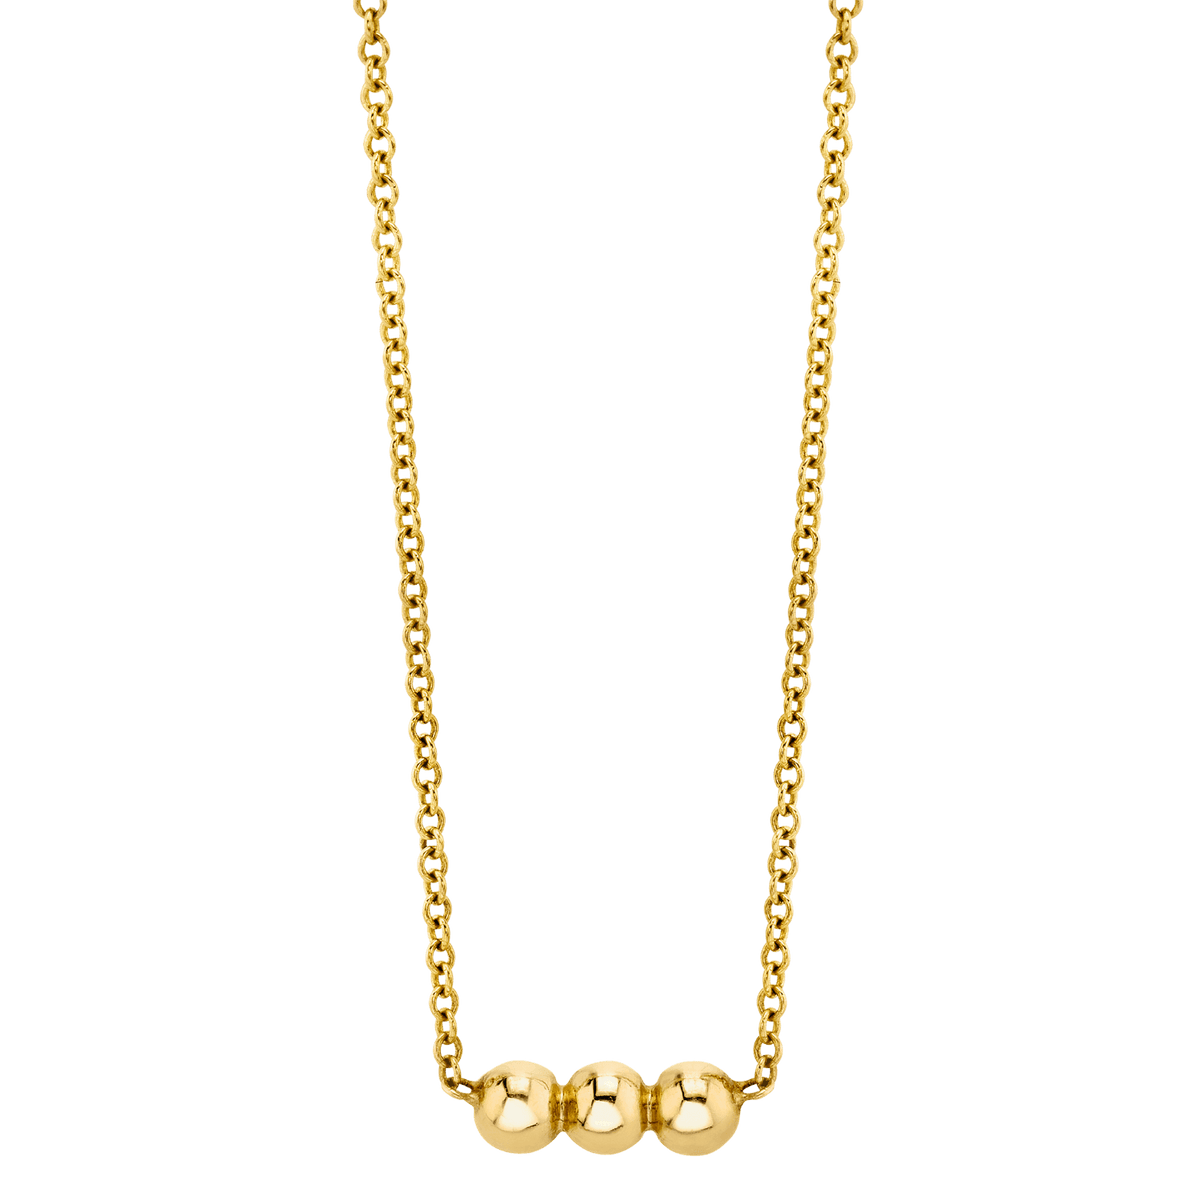 Tres Luxe Chain Necklace 14K Yellow Gold / 20 Inches by Baby Gold - Shop Custom Gold Jewelry